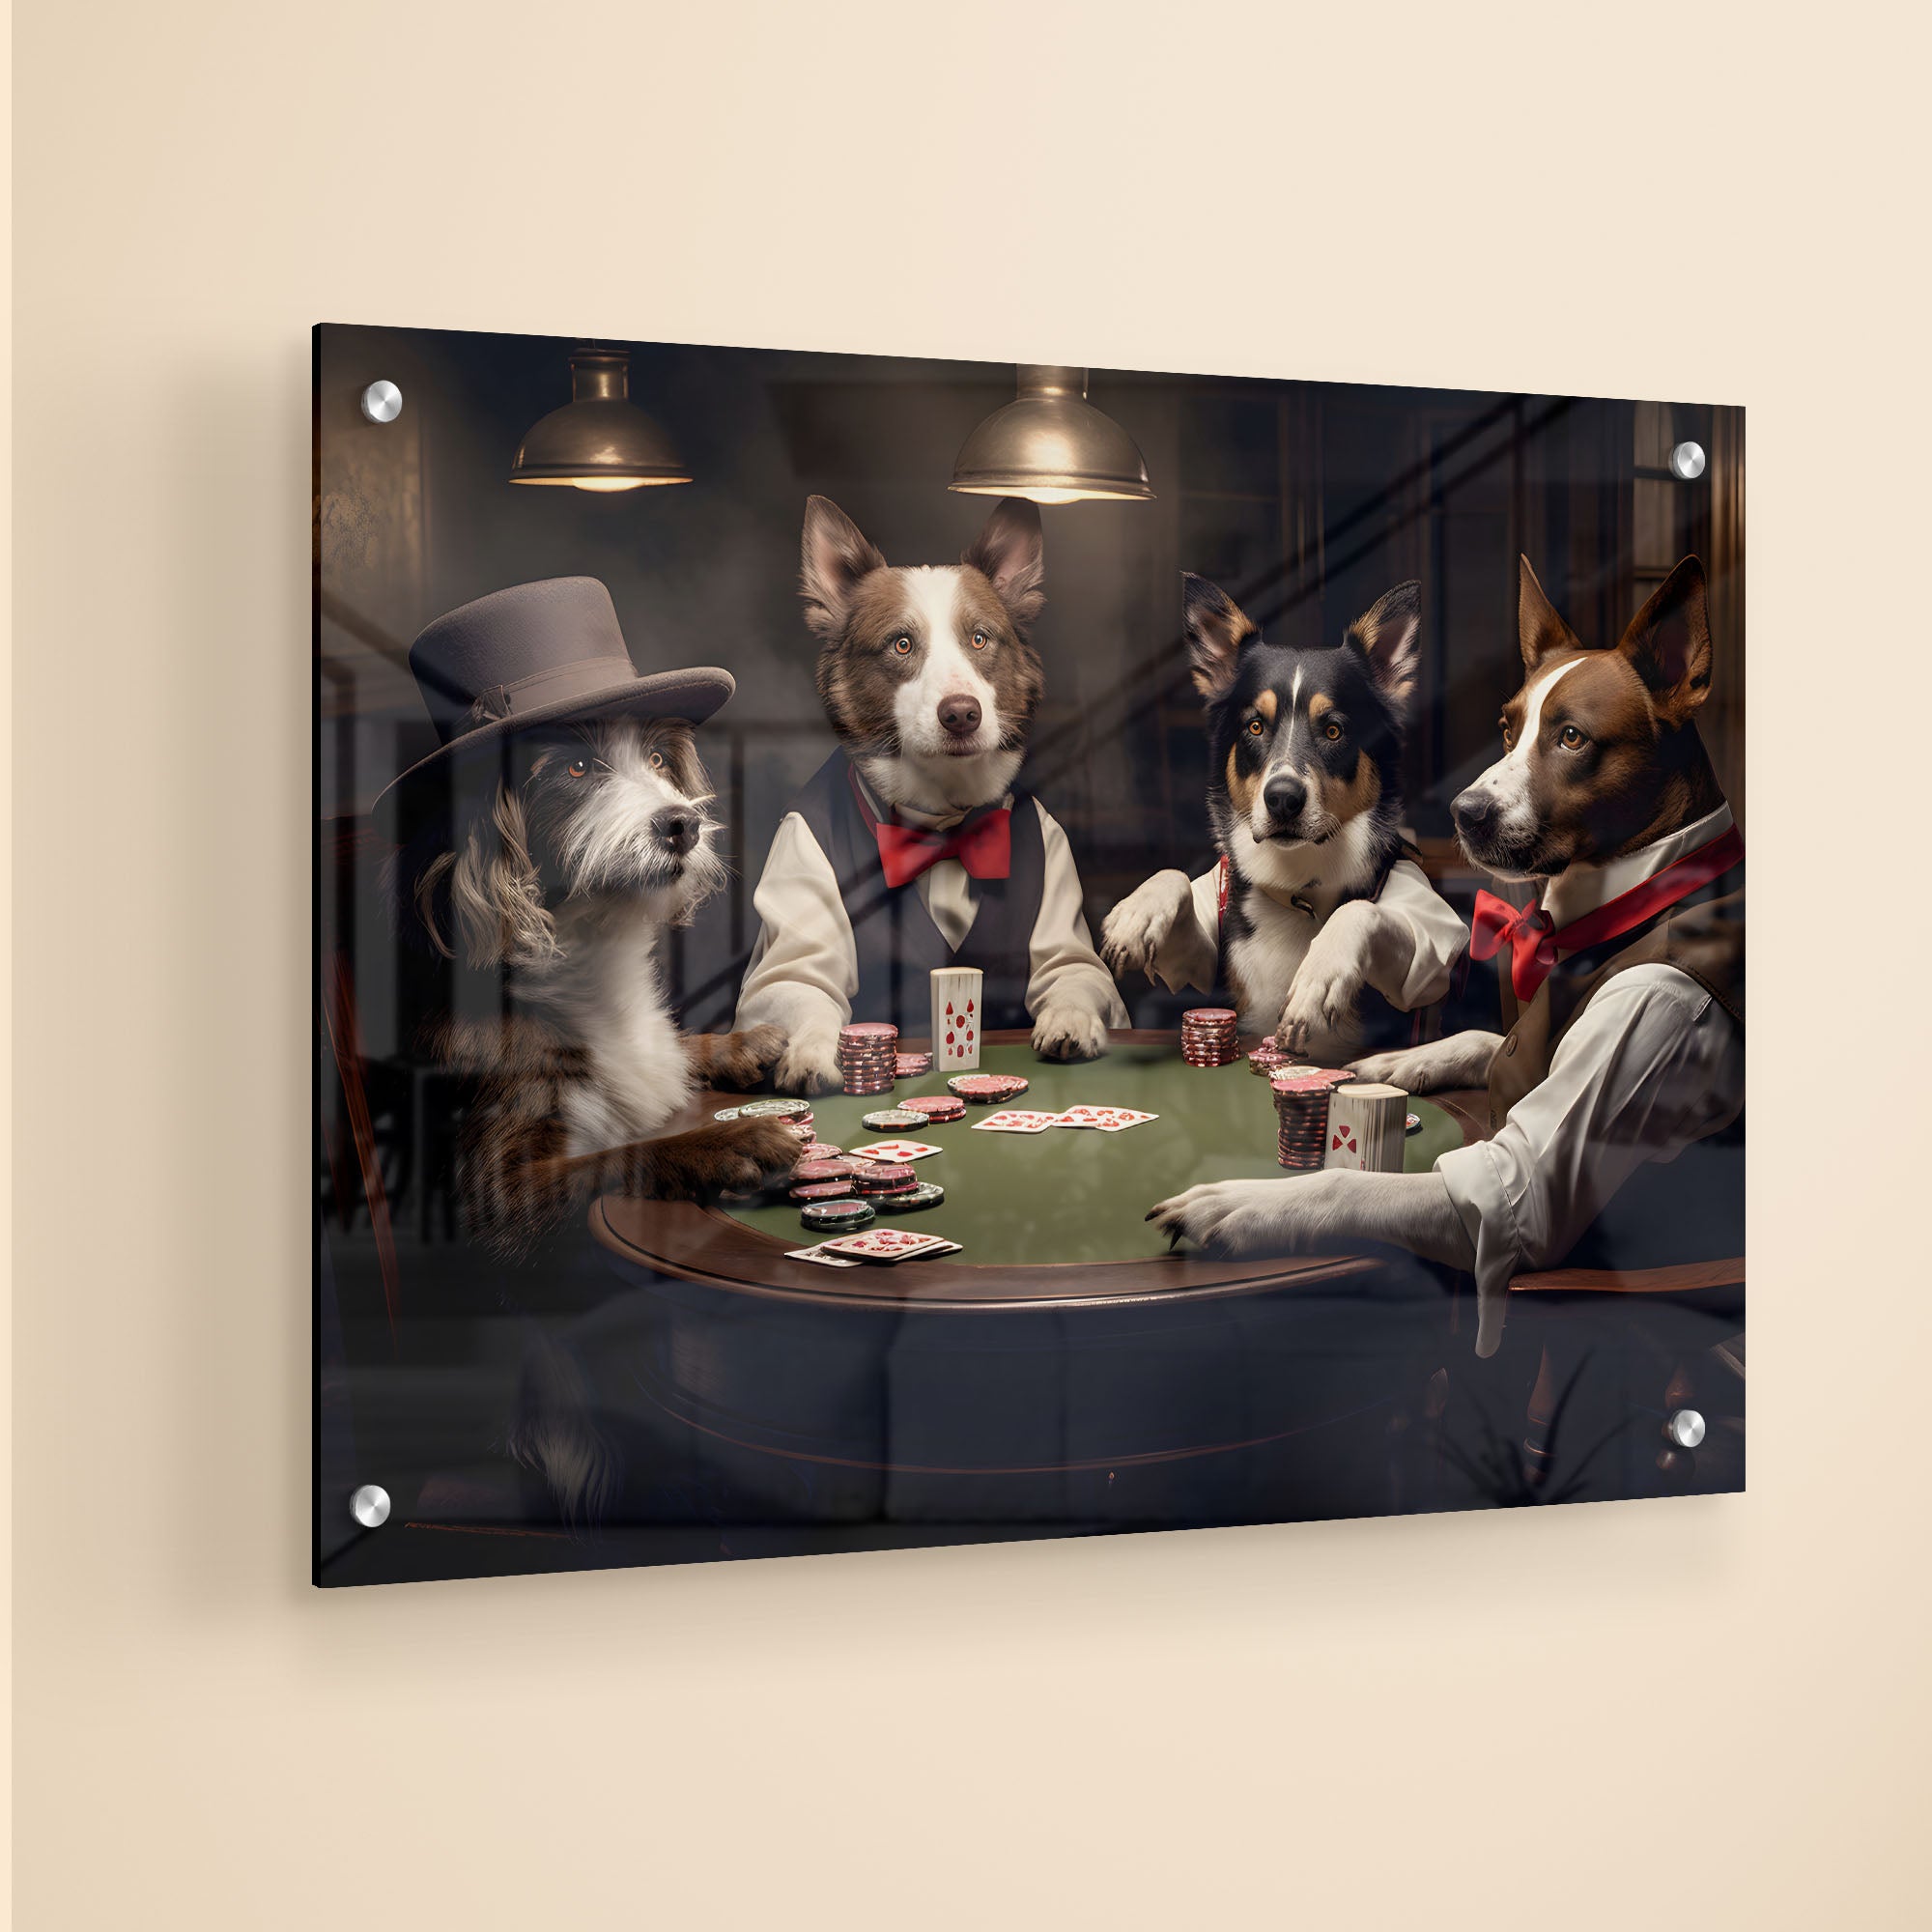 Dogs In Casino Acrylic Wall Painting